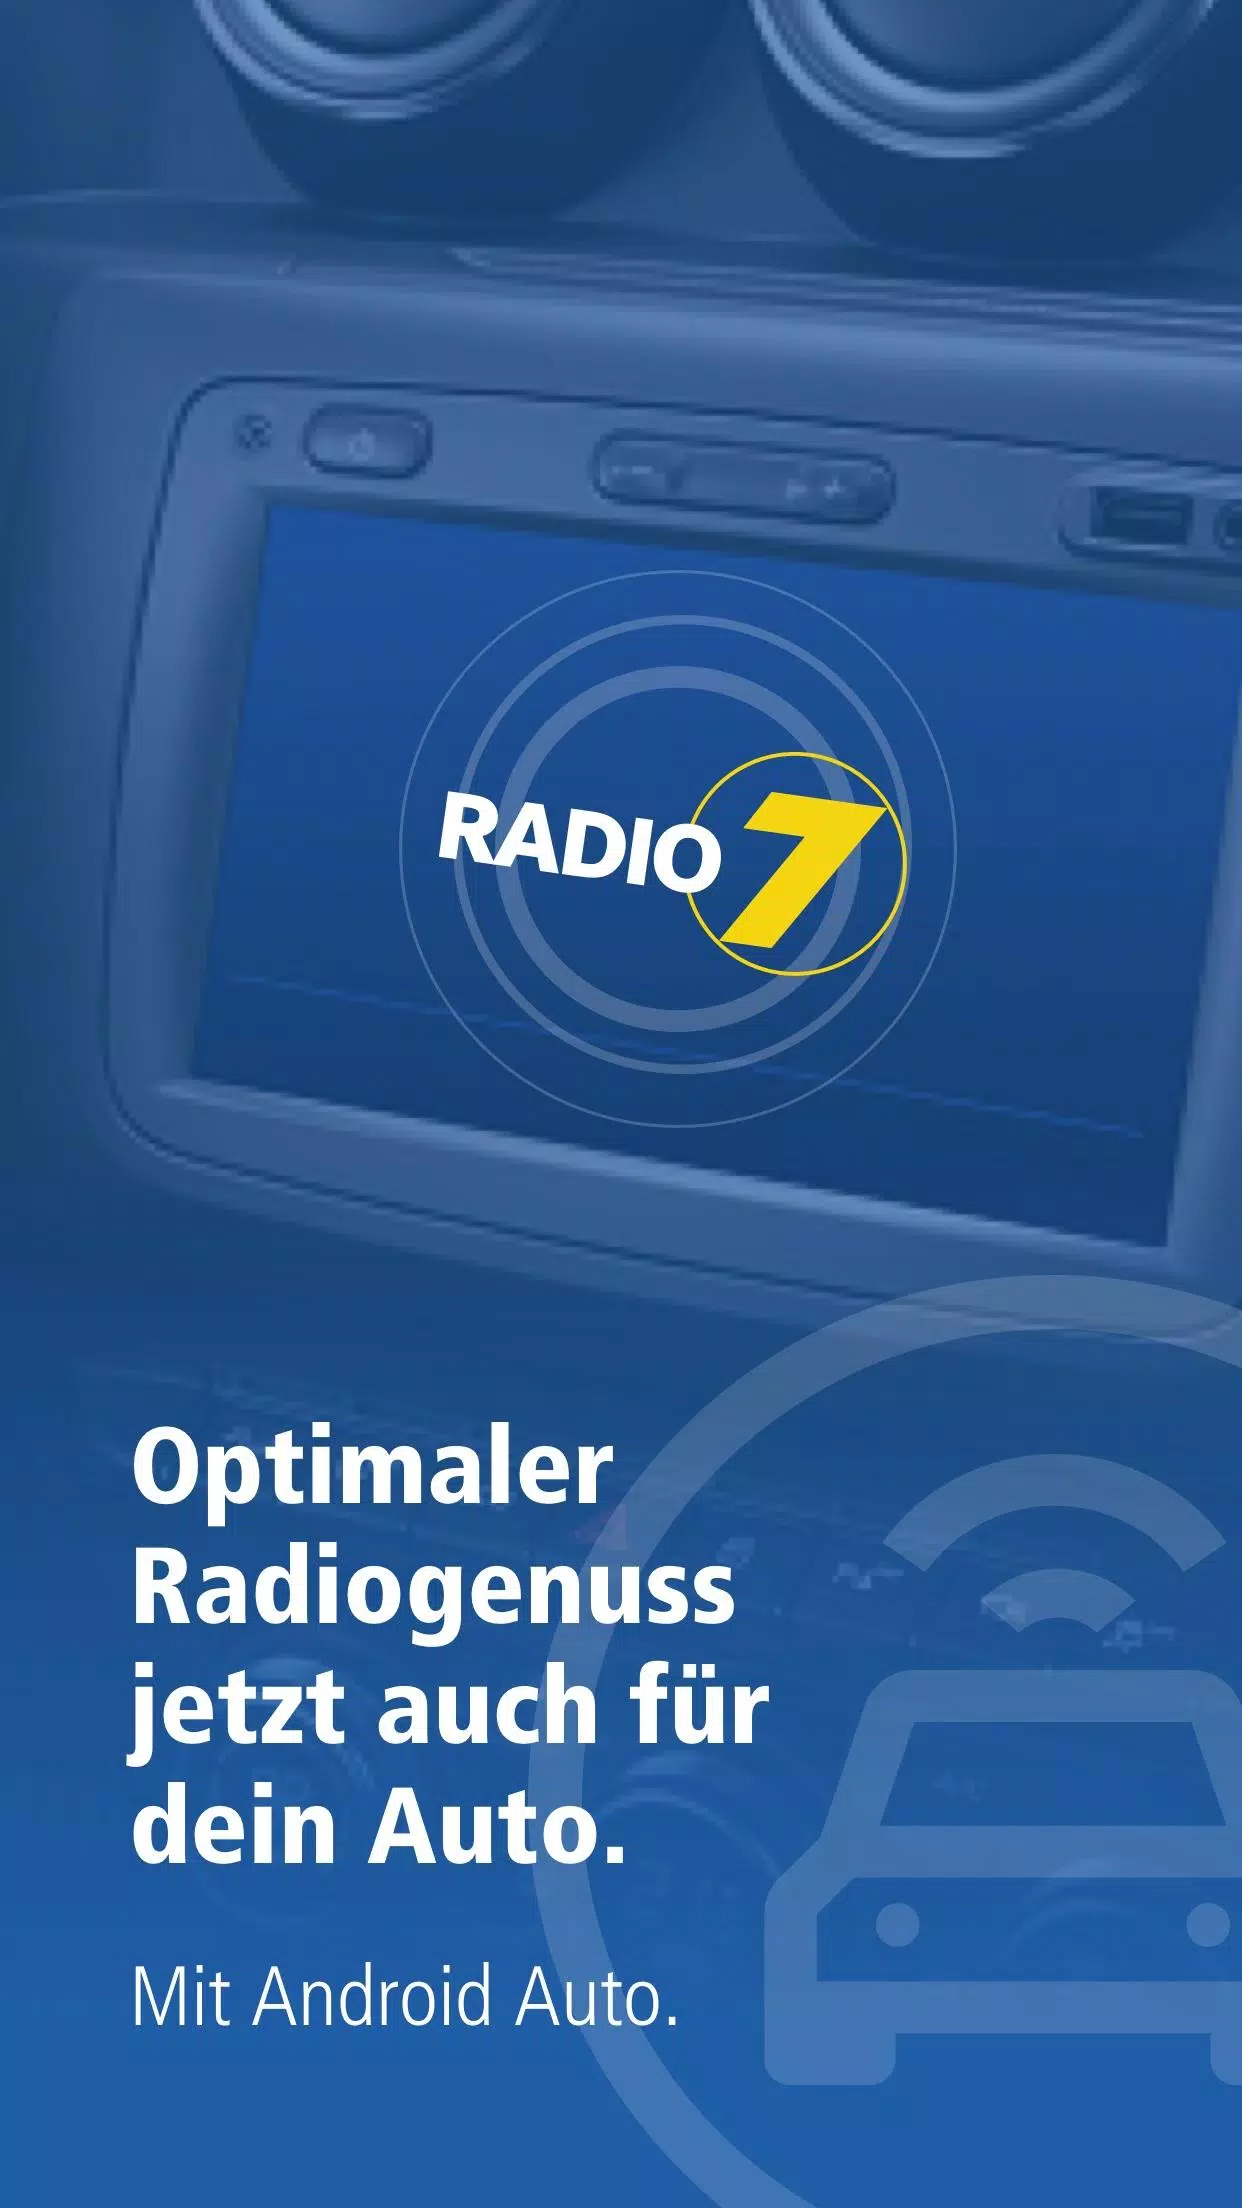 Radio 7 for Android - APK Download